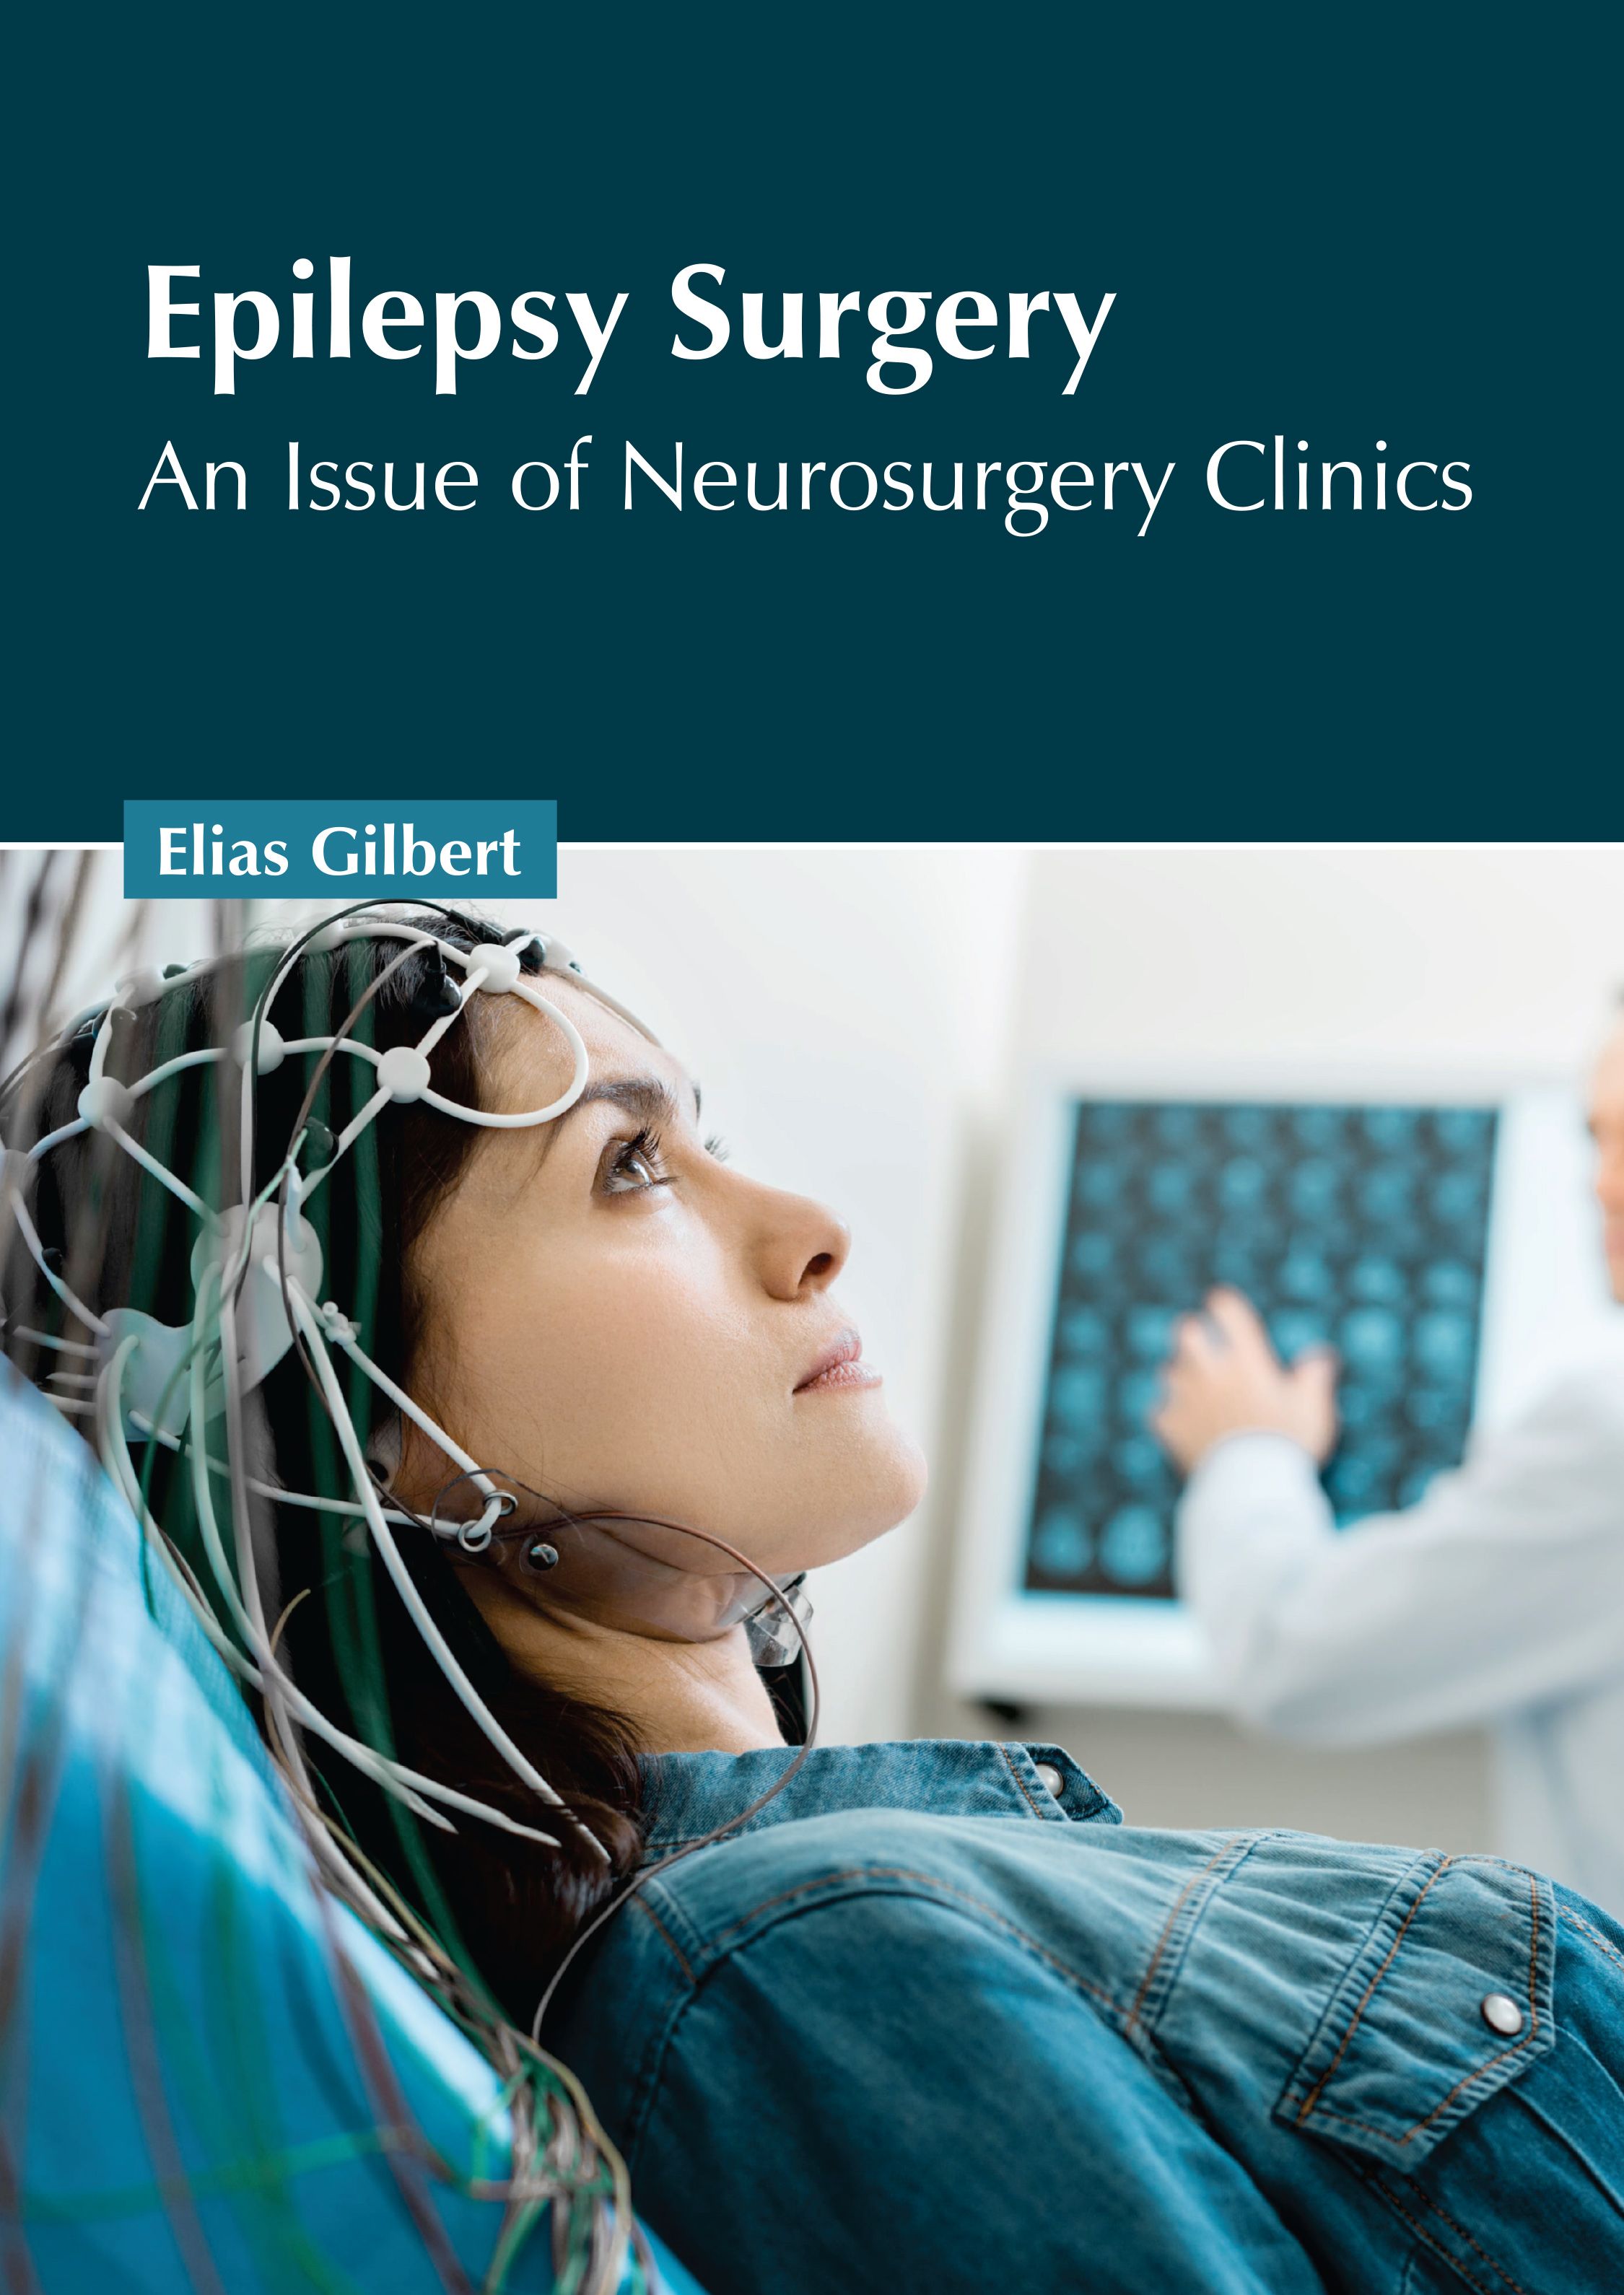 

medical-reference-books/surgery/epilepsy-surgery-an-issue-of-neurosurgery-clinics-9798887400976